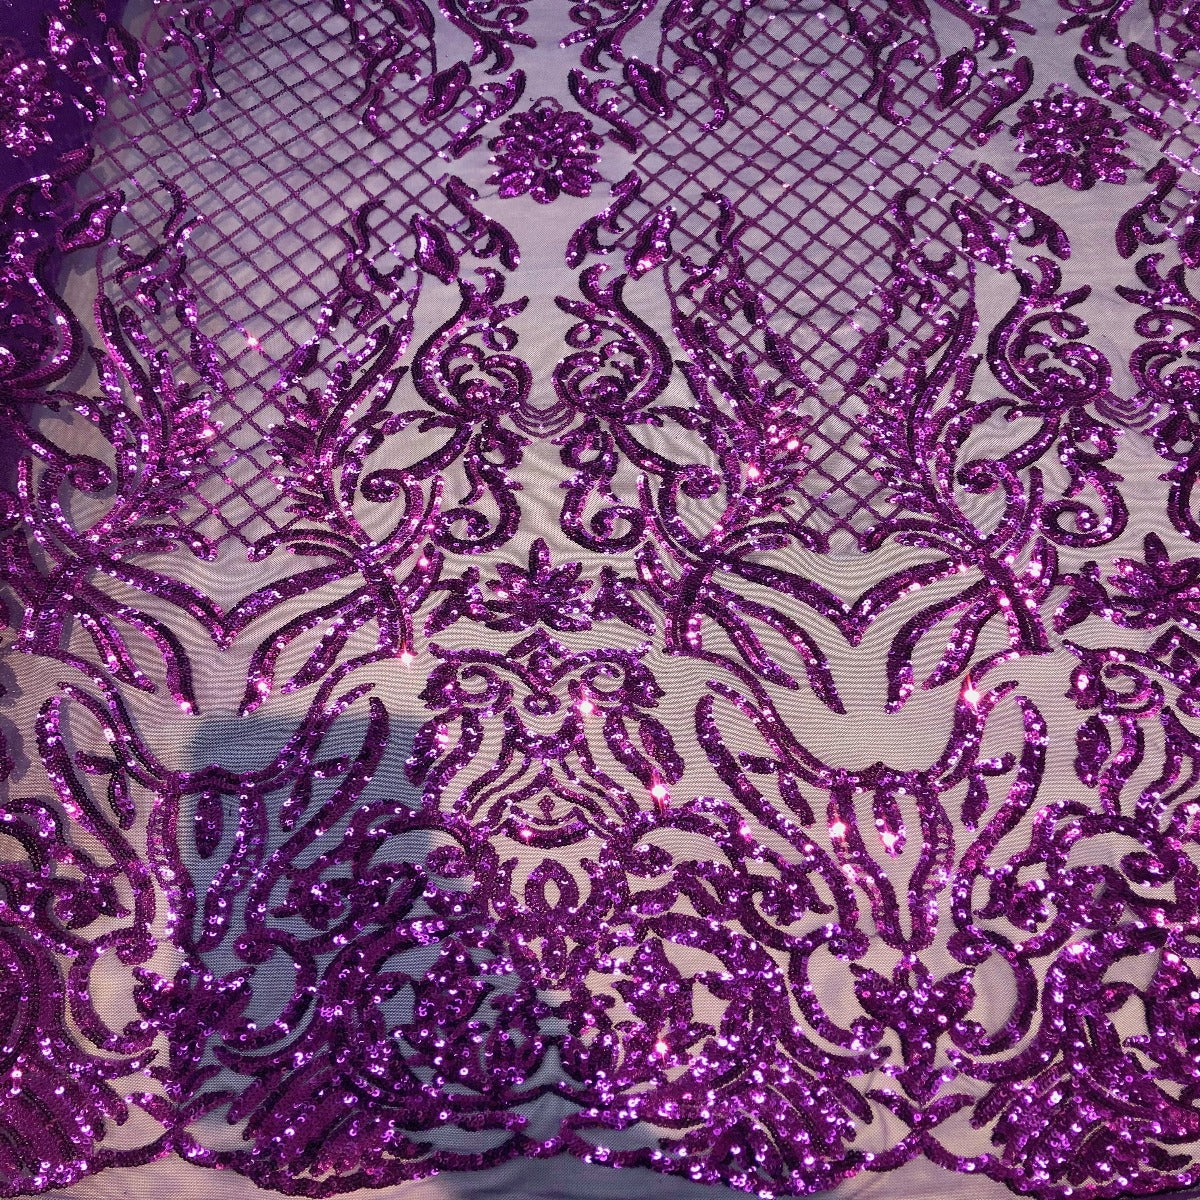 Lace Central Lace Fabric - 5 Yards - Lilac